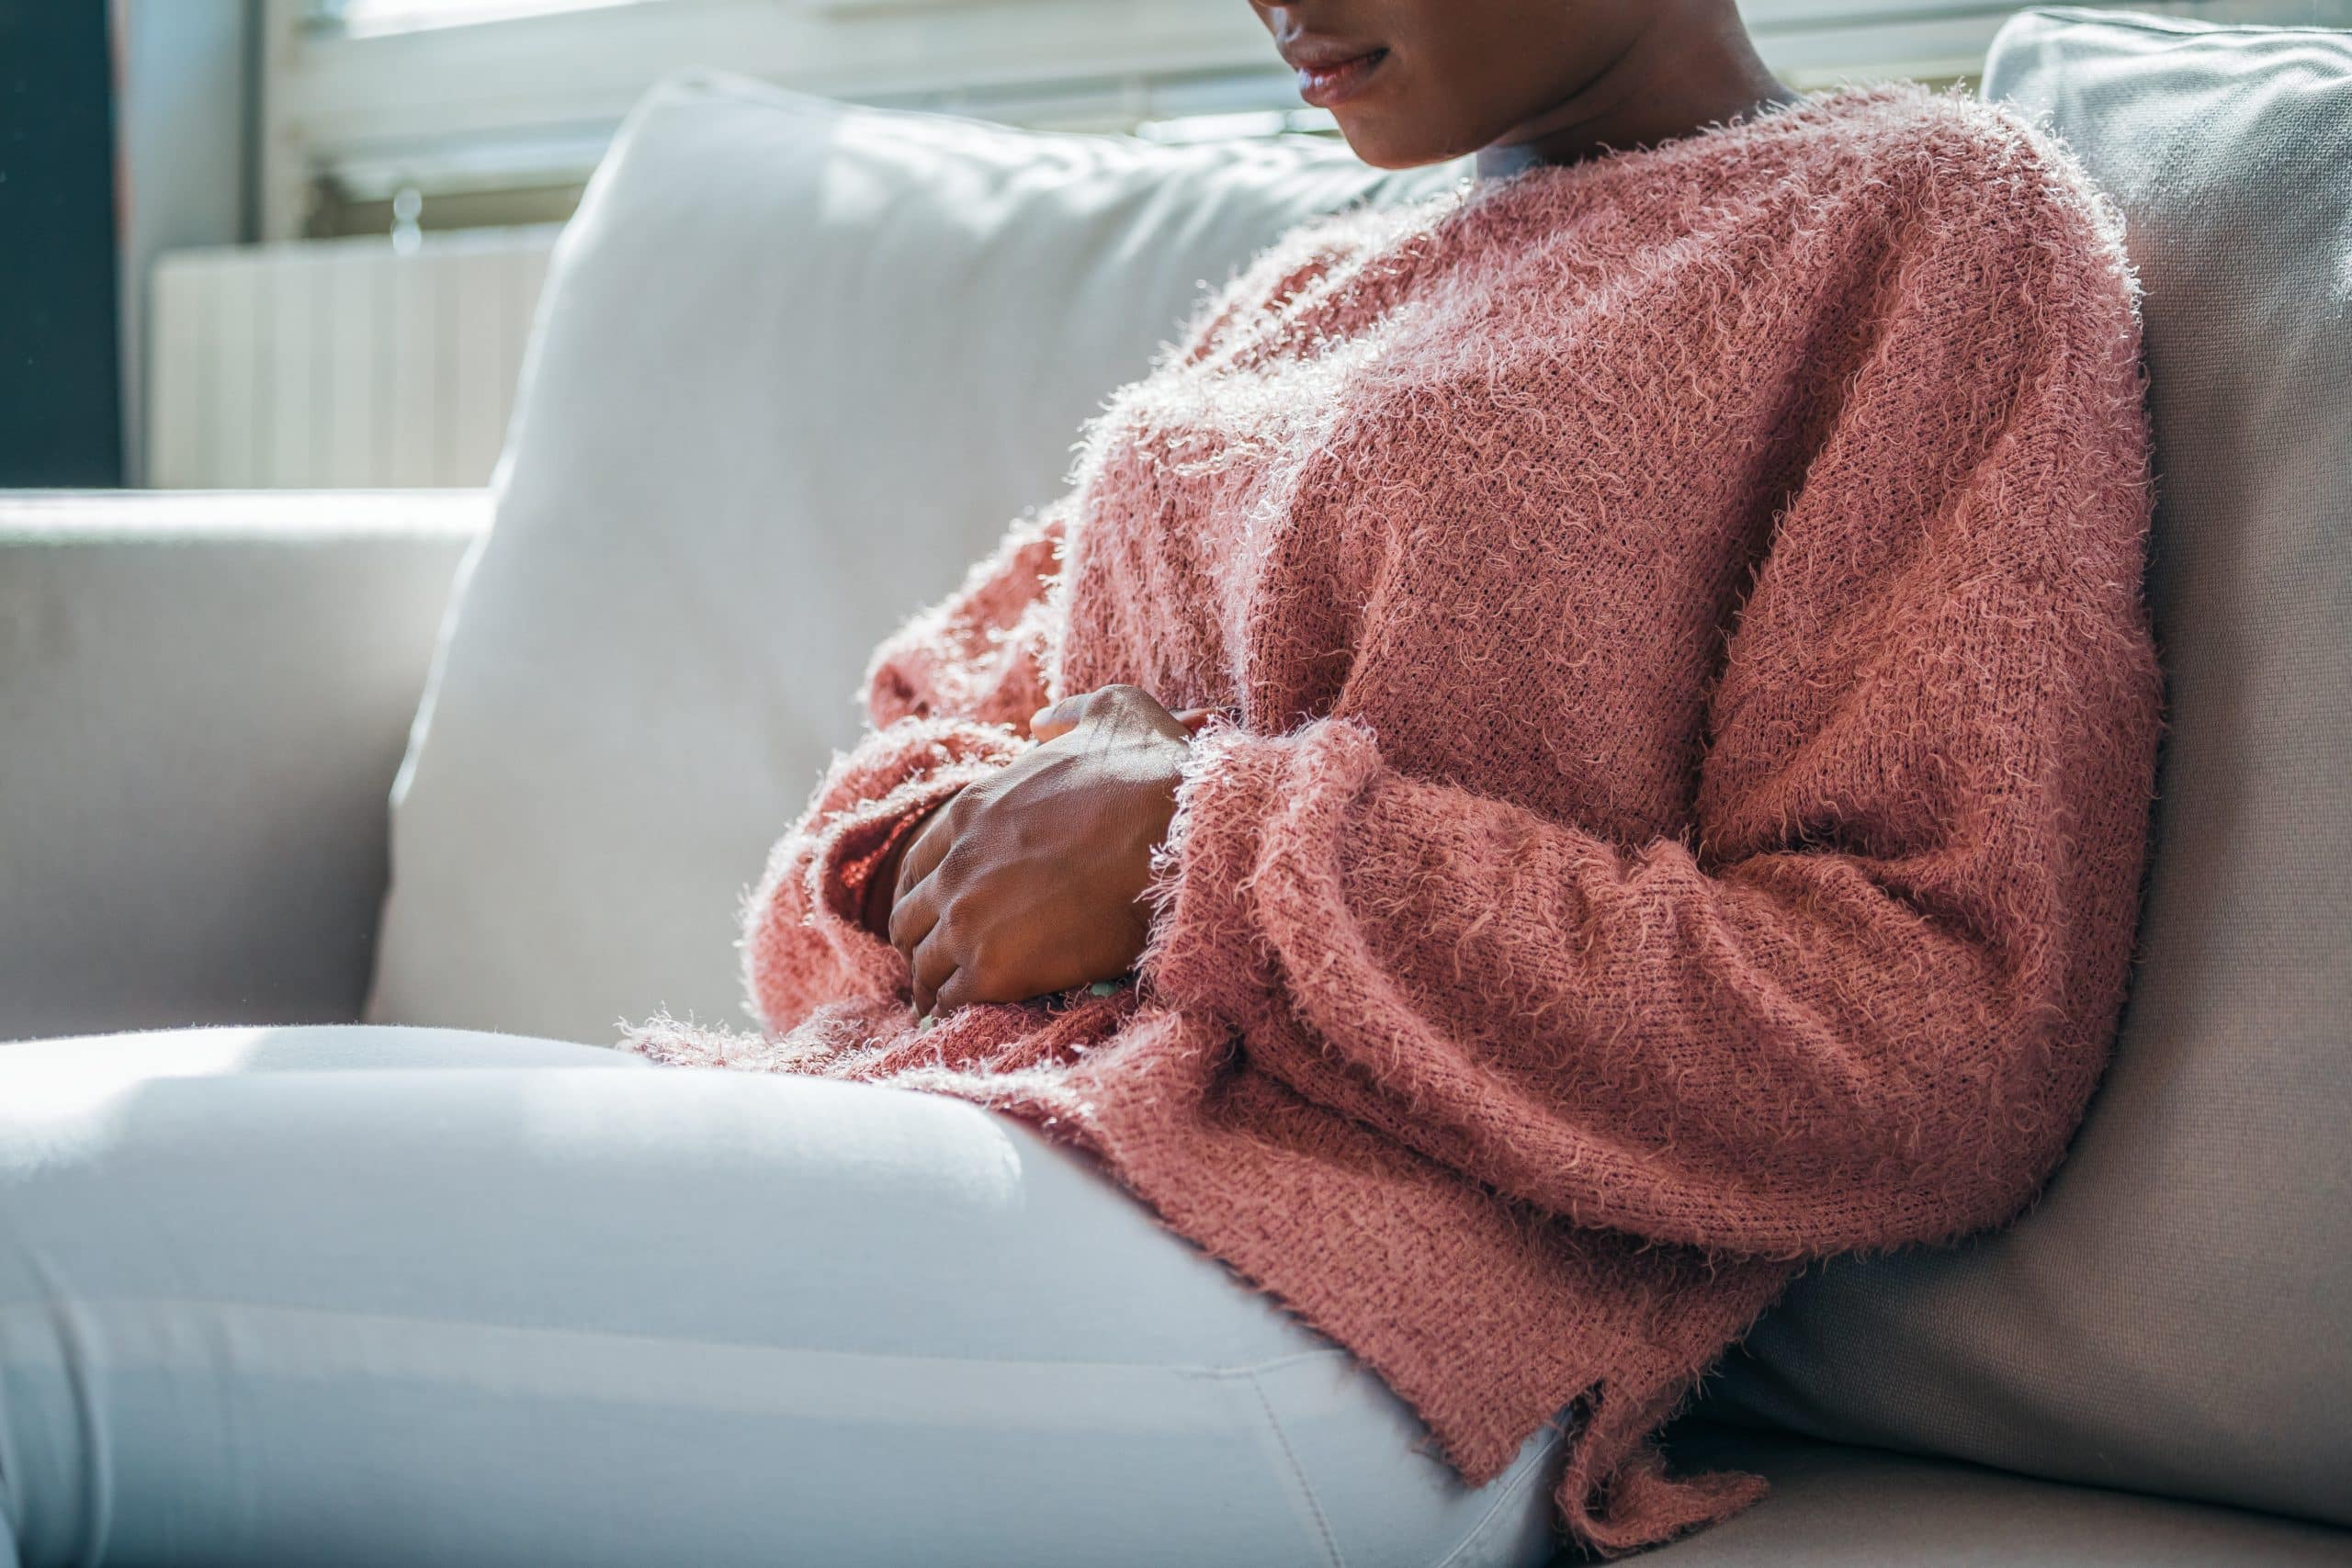 Sever abdominal pain after a positive pregnancy test could point to a ruptured ectopic pregnancy